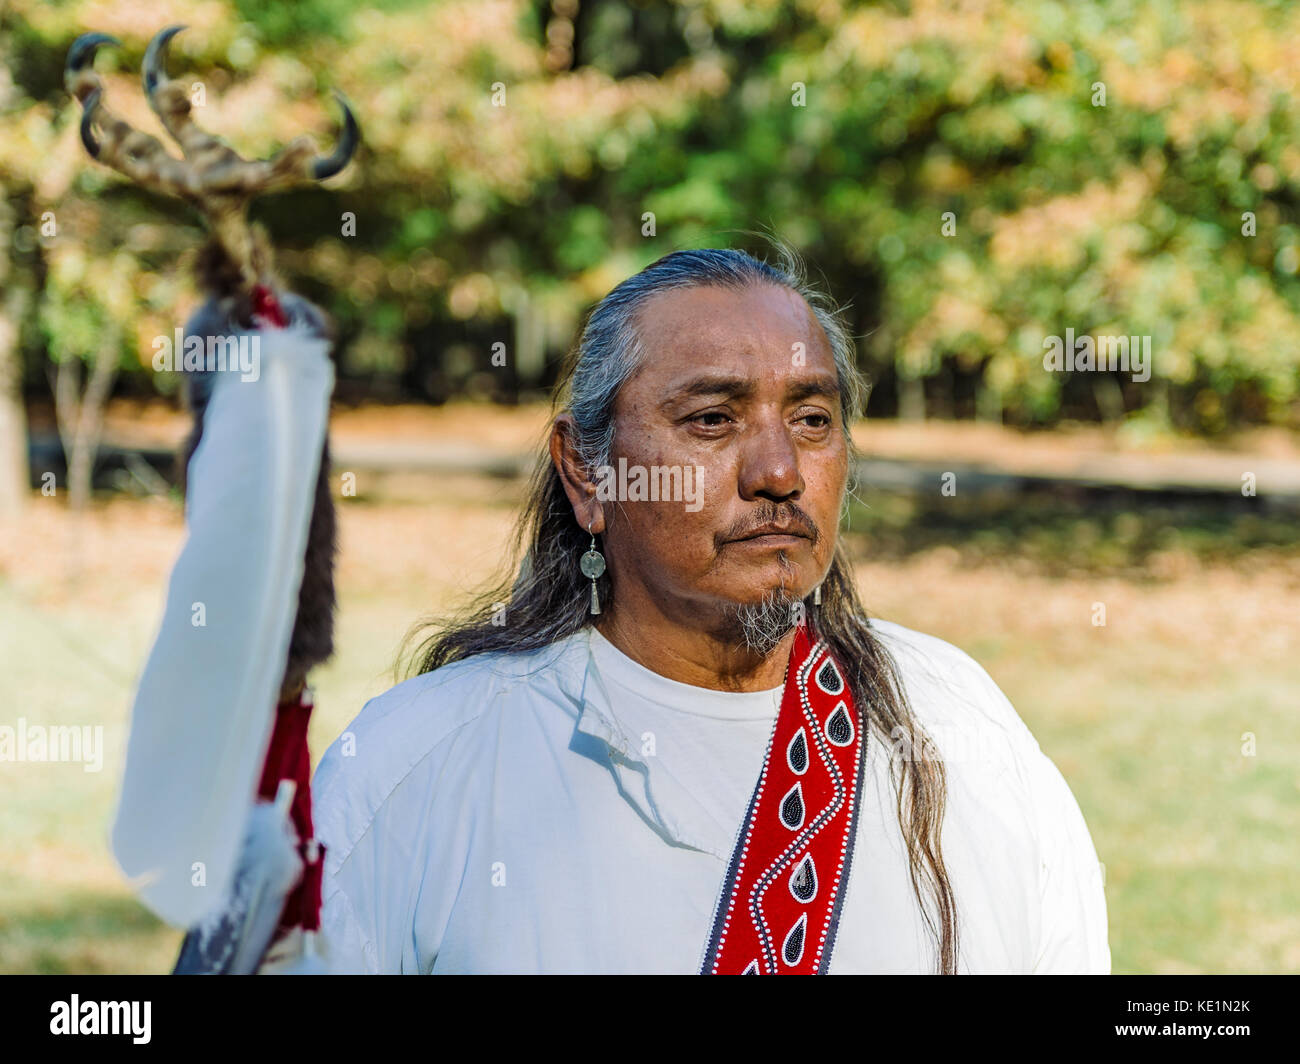 Native American Indian portrait  of Creek Confederacy ancestry, Fort Toulouse, Fort Jackson, Wetumpka Alabama USA. Stock Photo